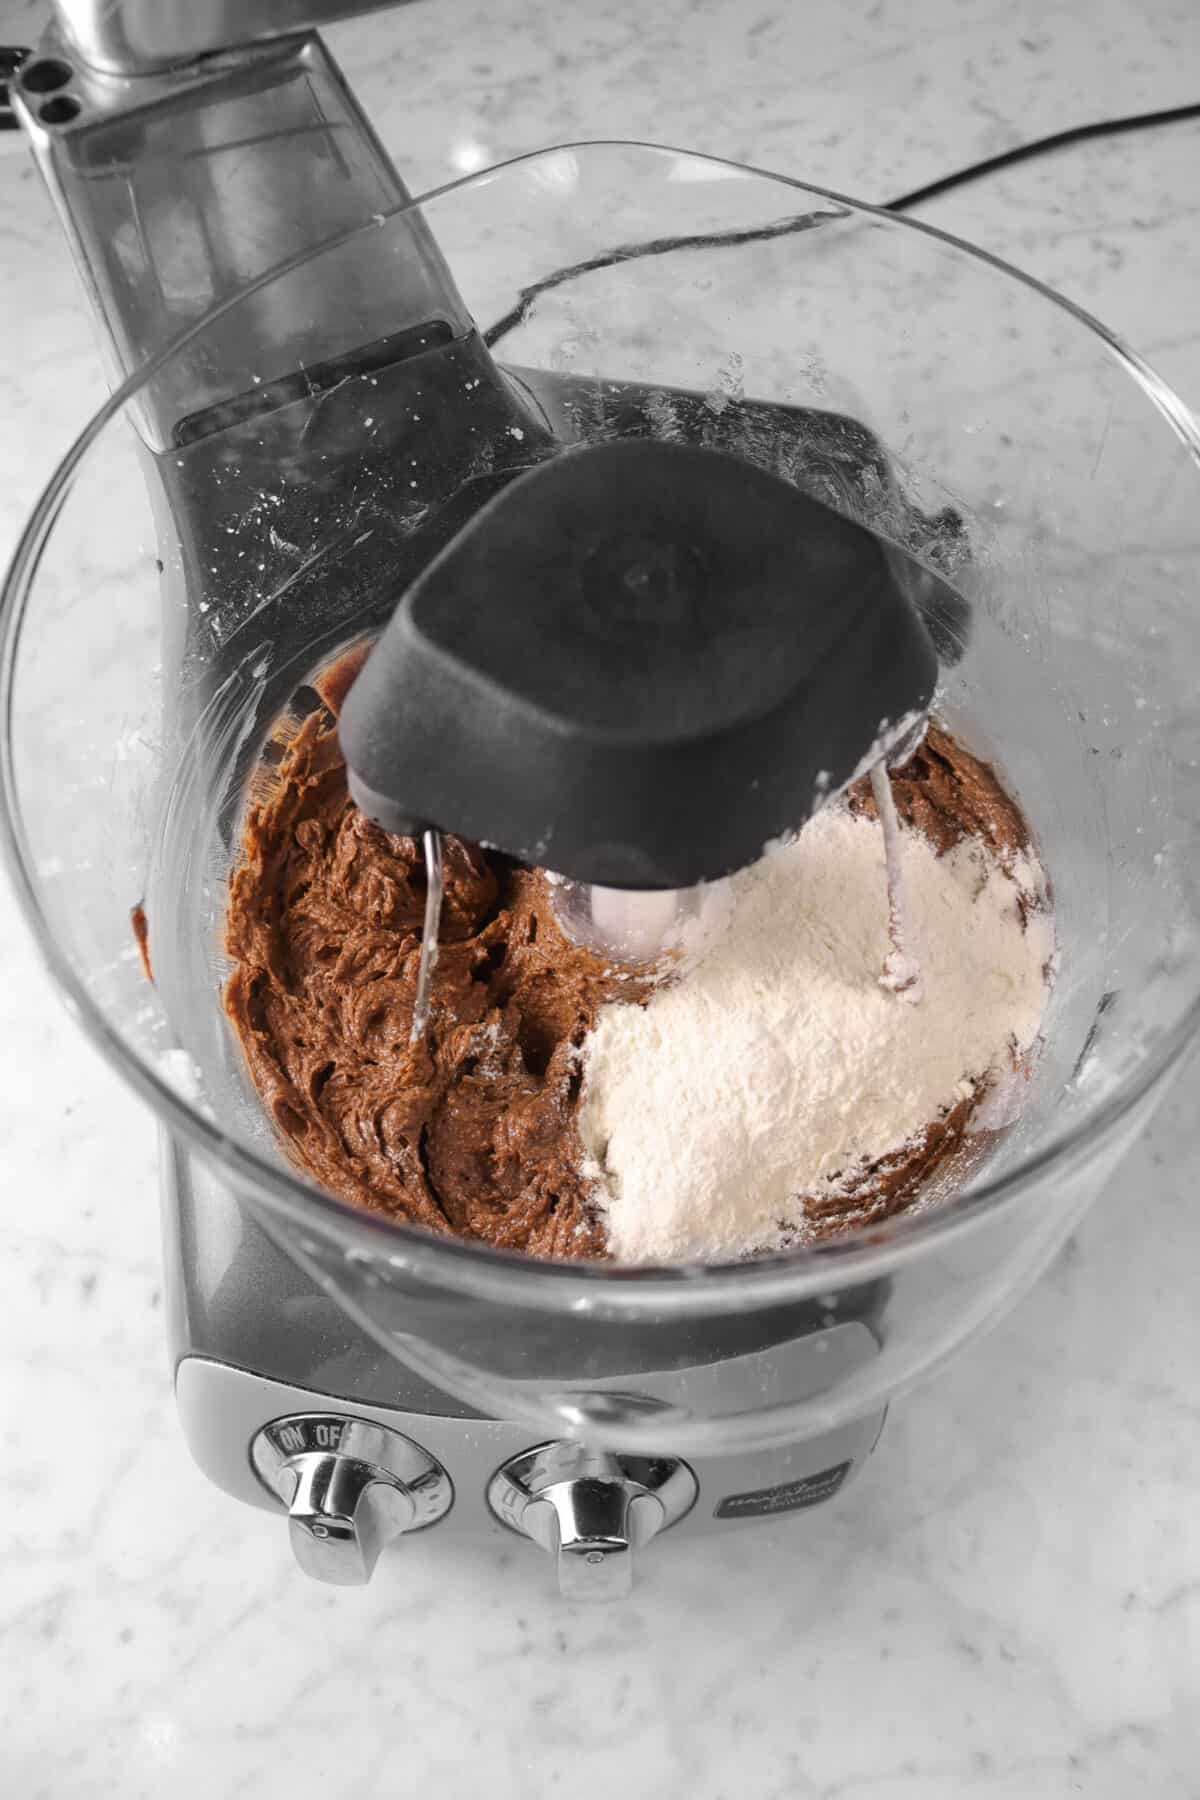 flour added to chocolate mixture